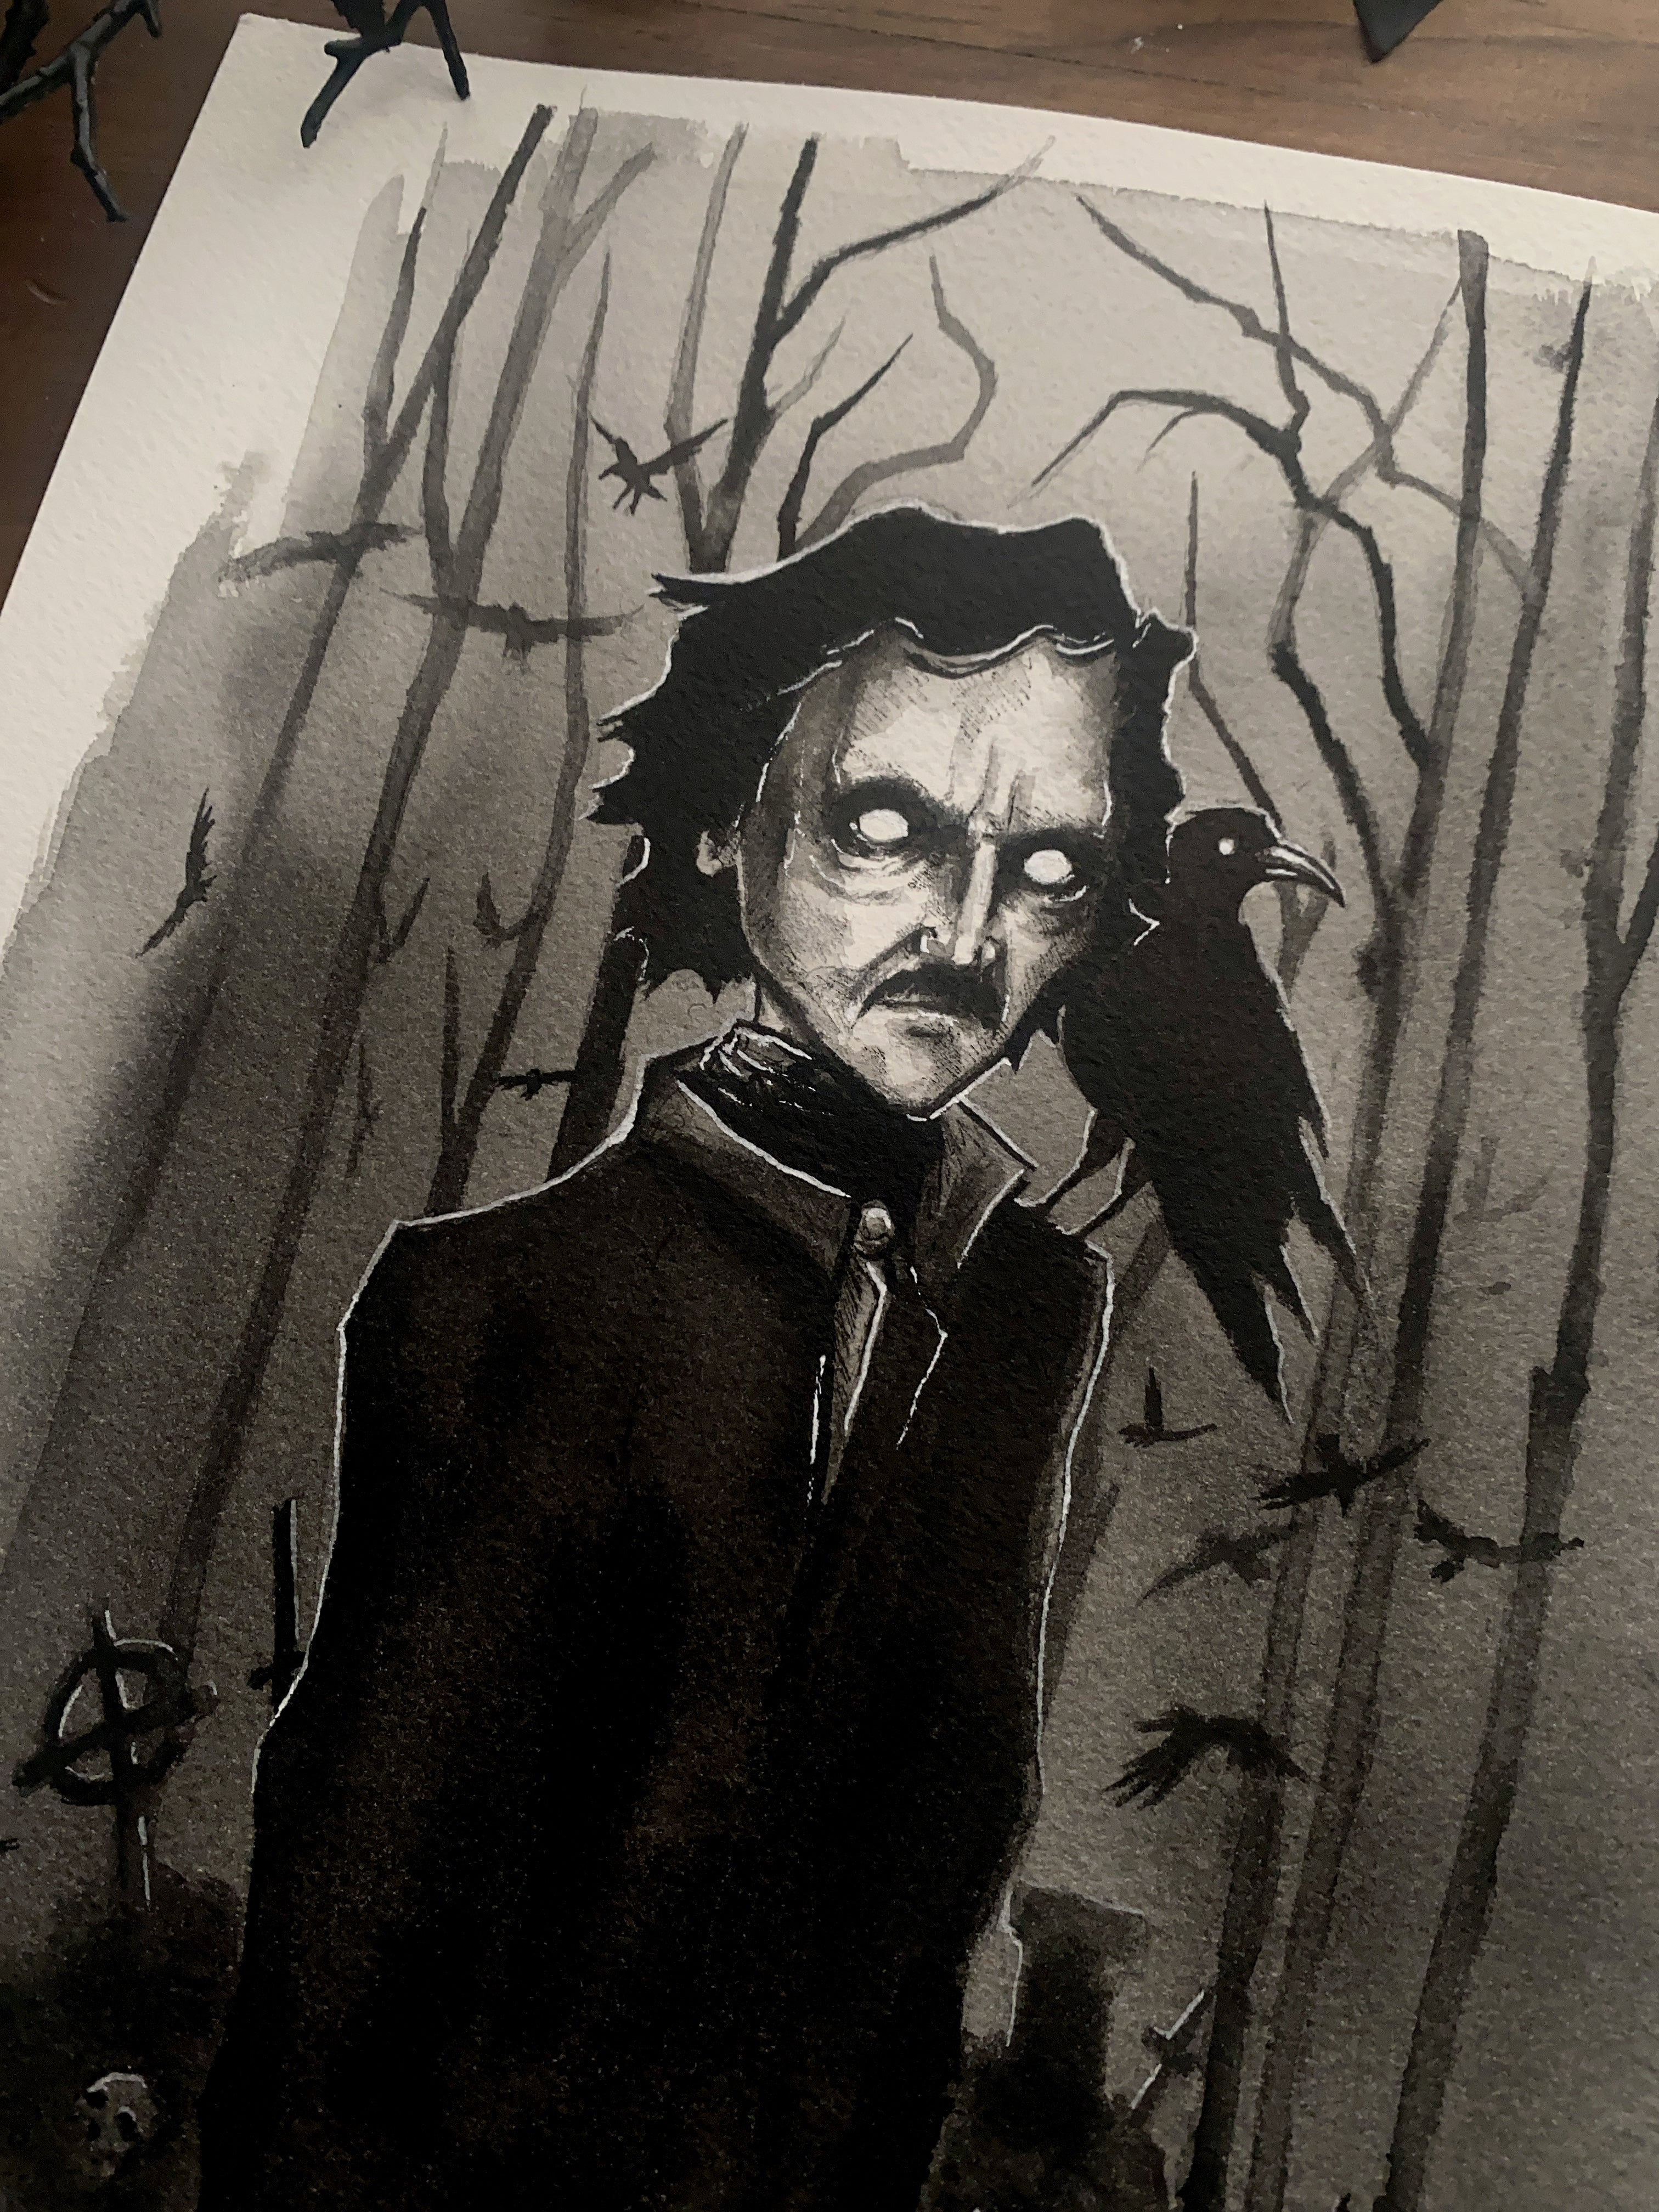 Poe and The Raven